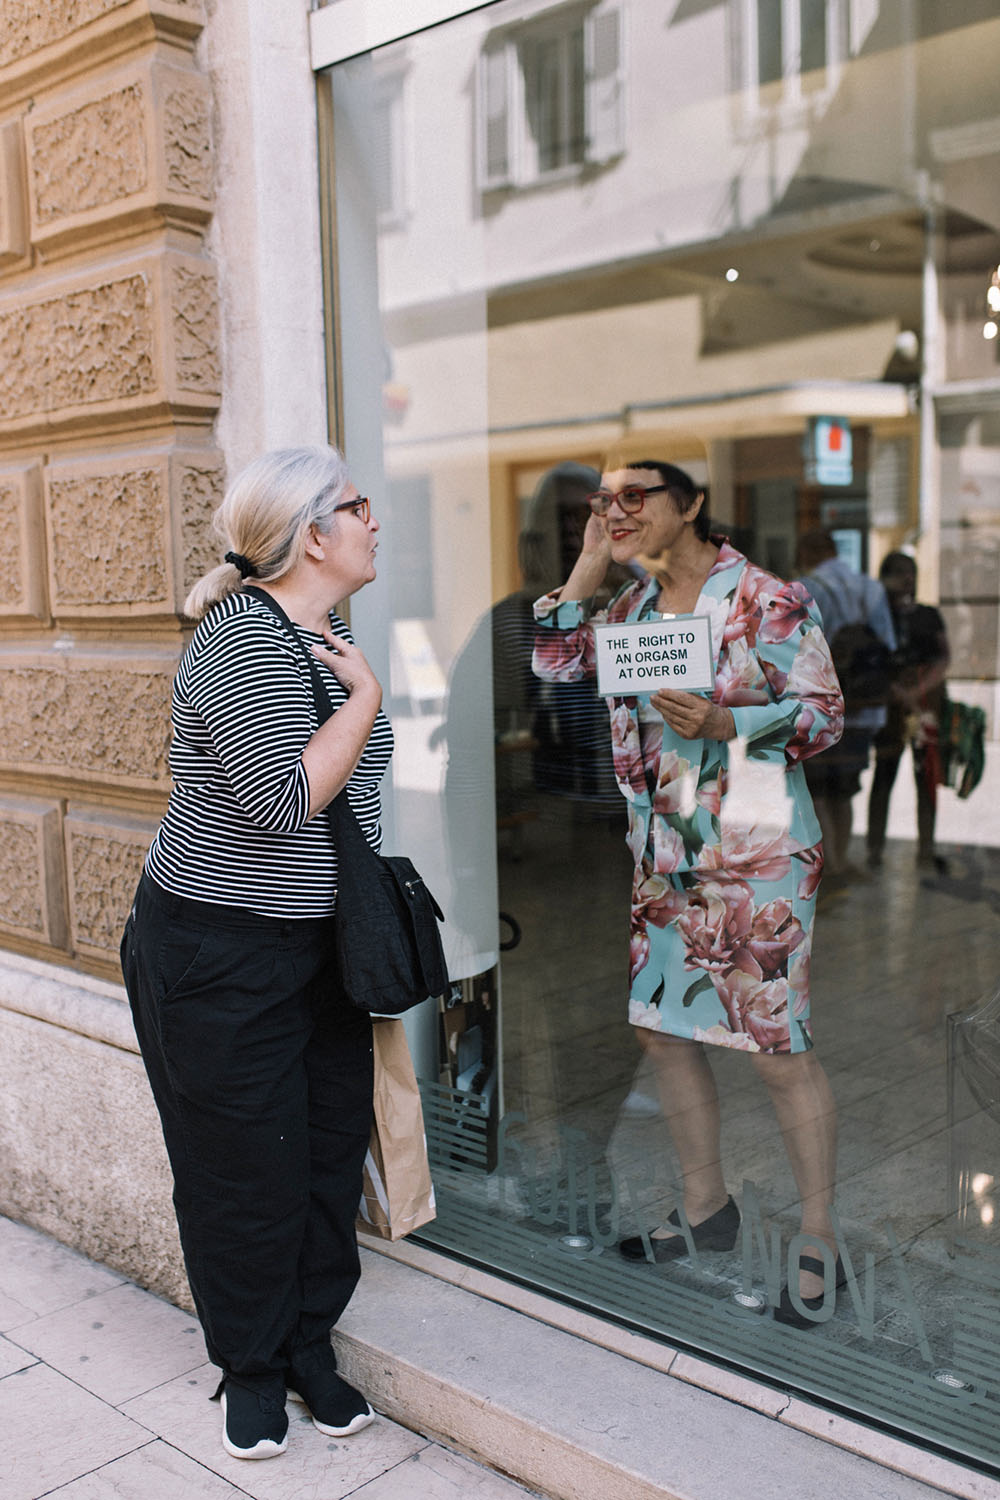 The artist is standing in a shop window holding a sign with the project's title, interacting with an older woman on the street outside.